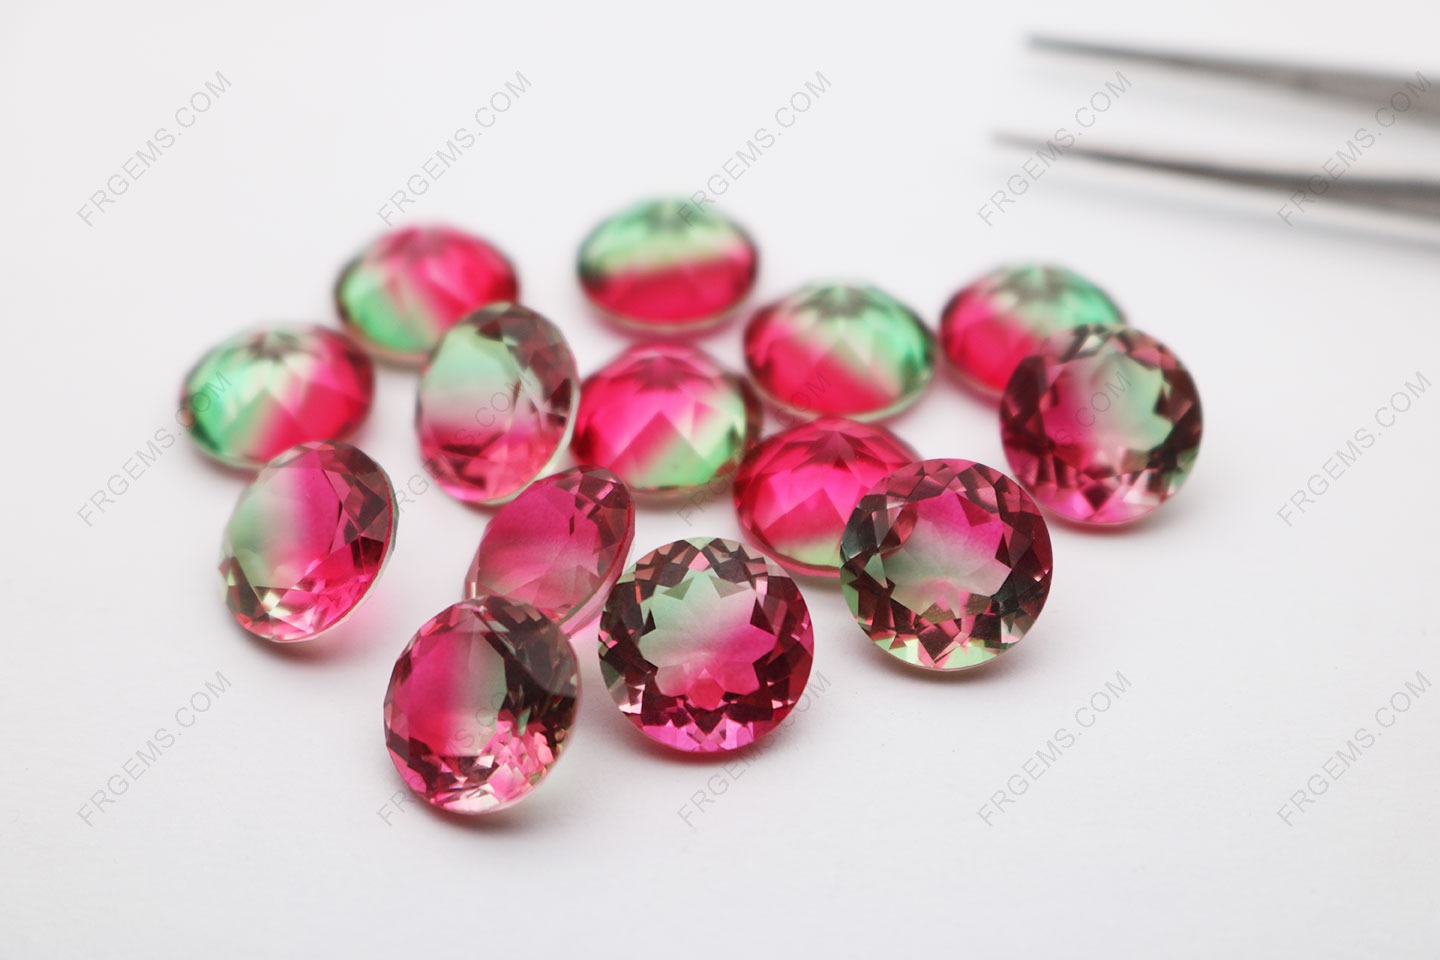 Synthetic Watermelon Tourmaline Glass BiColor BX04 Round Faceted 12mm Loose gemstones wholesale gemstones